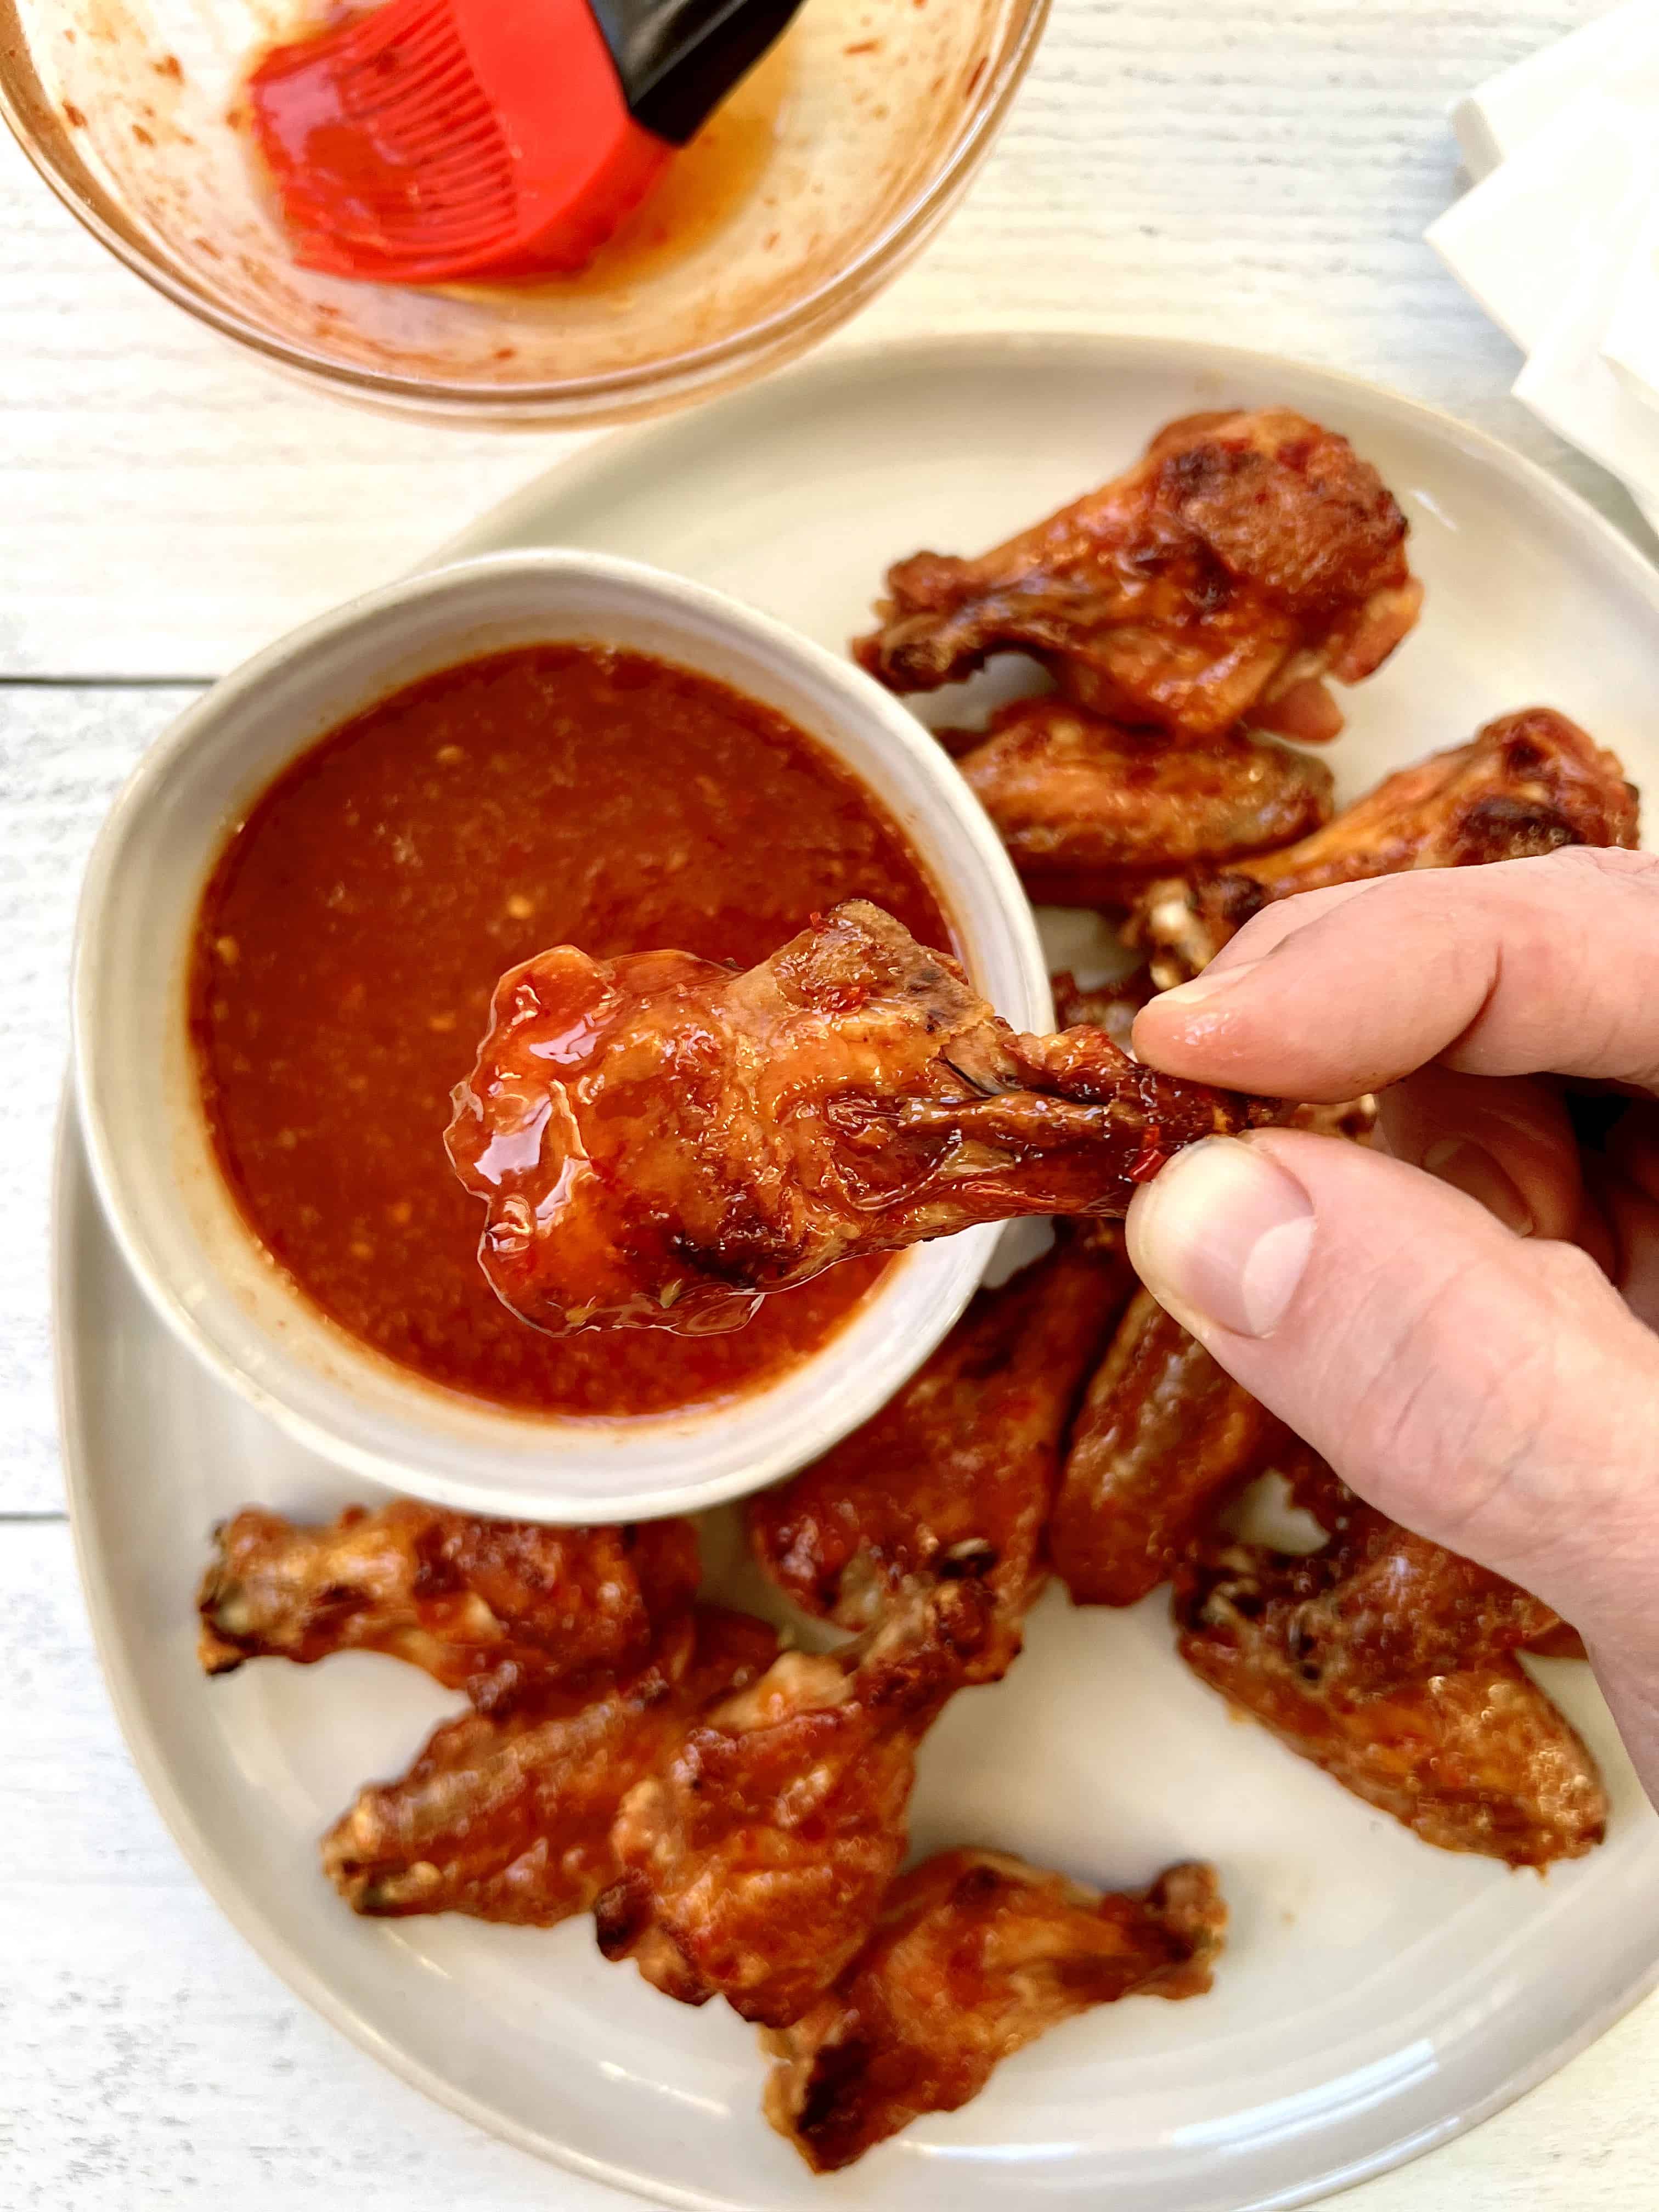 a hand holding up a hot wing above a platter of more hot wings and a small bowl of more hot chili sauce